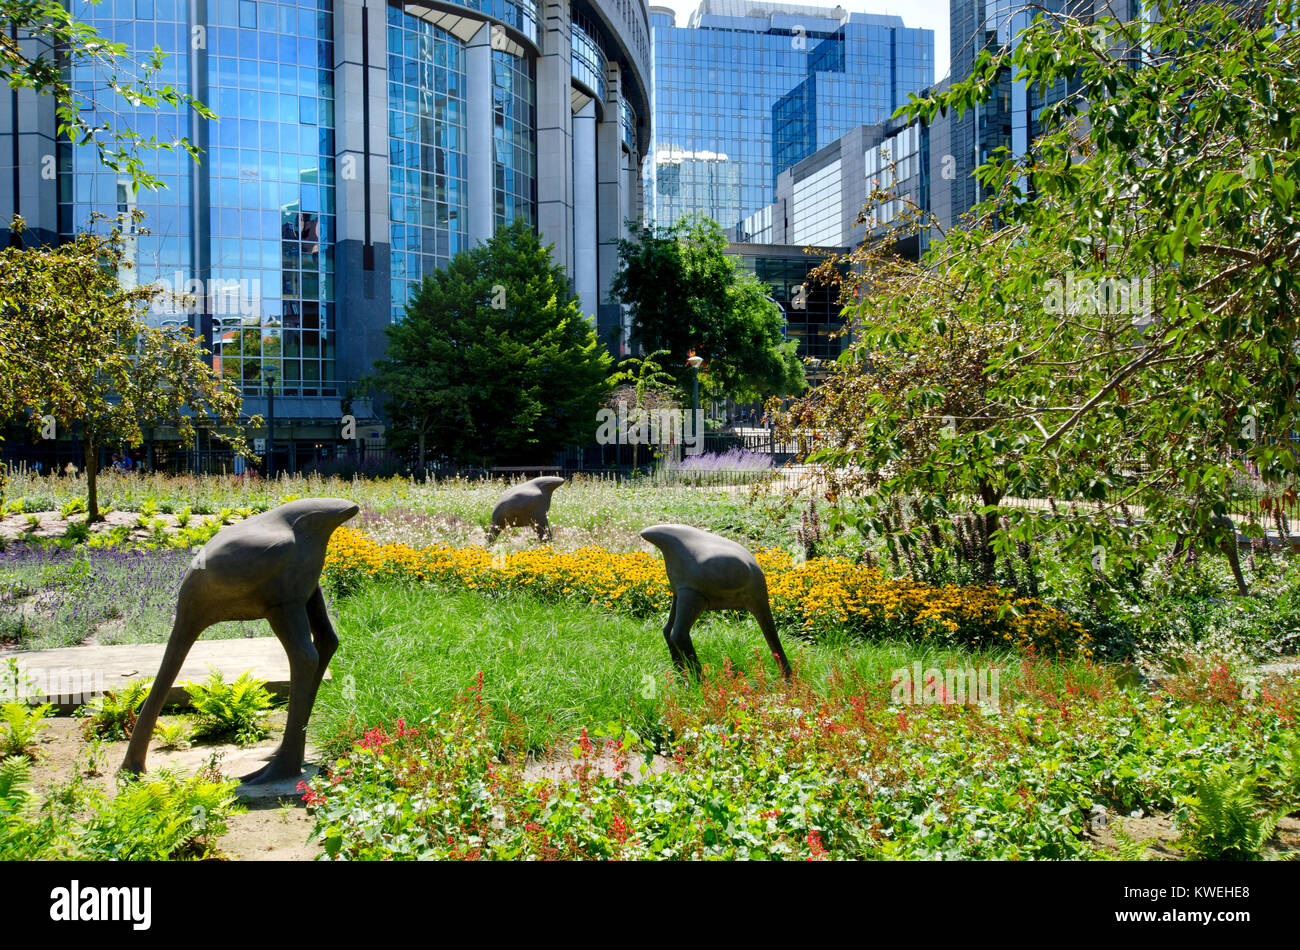 Brussels, Belgium. European Parliament Building - sculpture garden in the Parc Leopold with 12 ostriches buring their heads (August 2016) Stock Photo